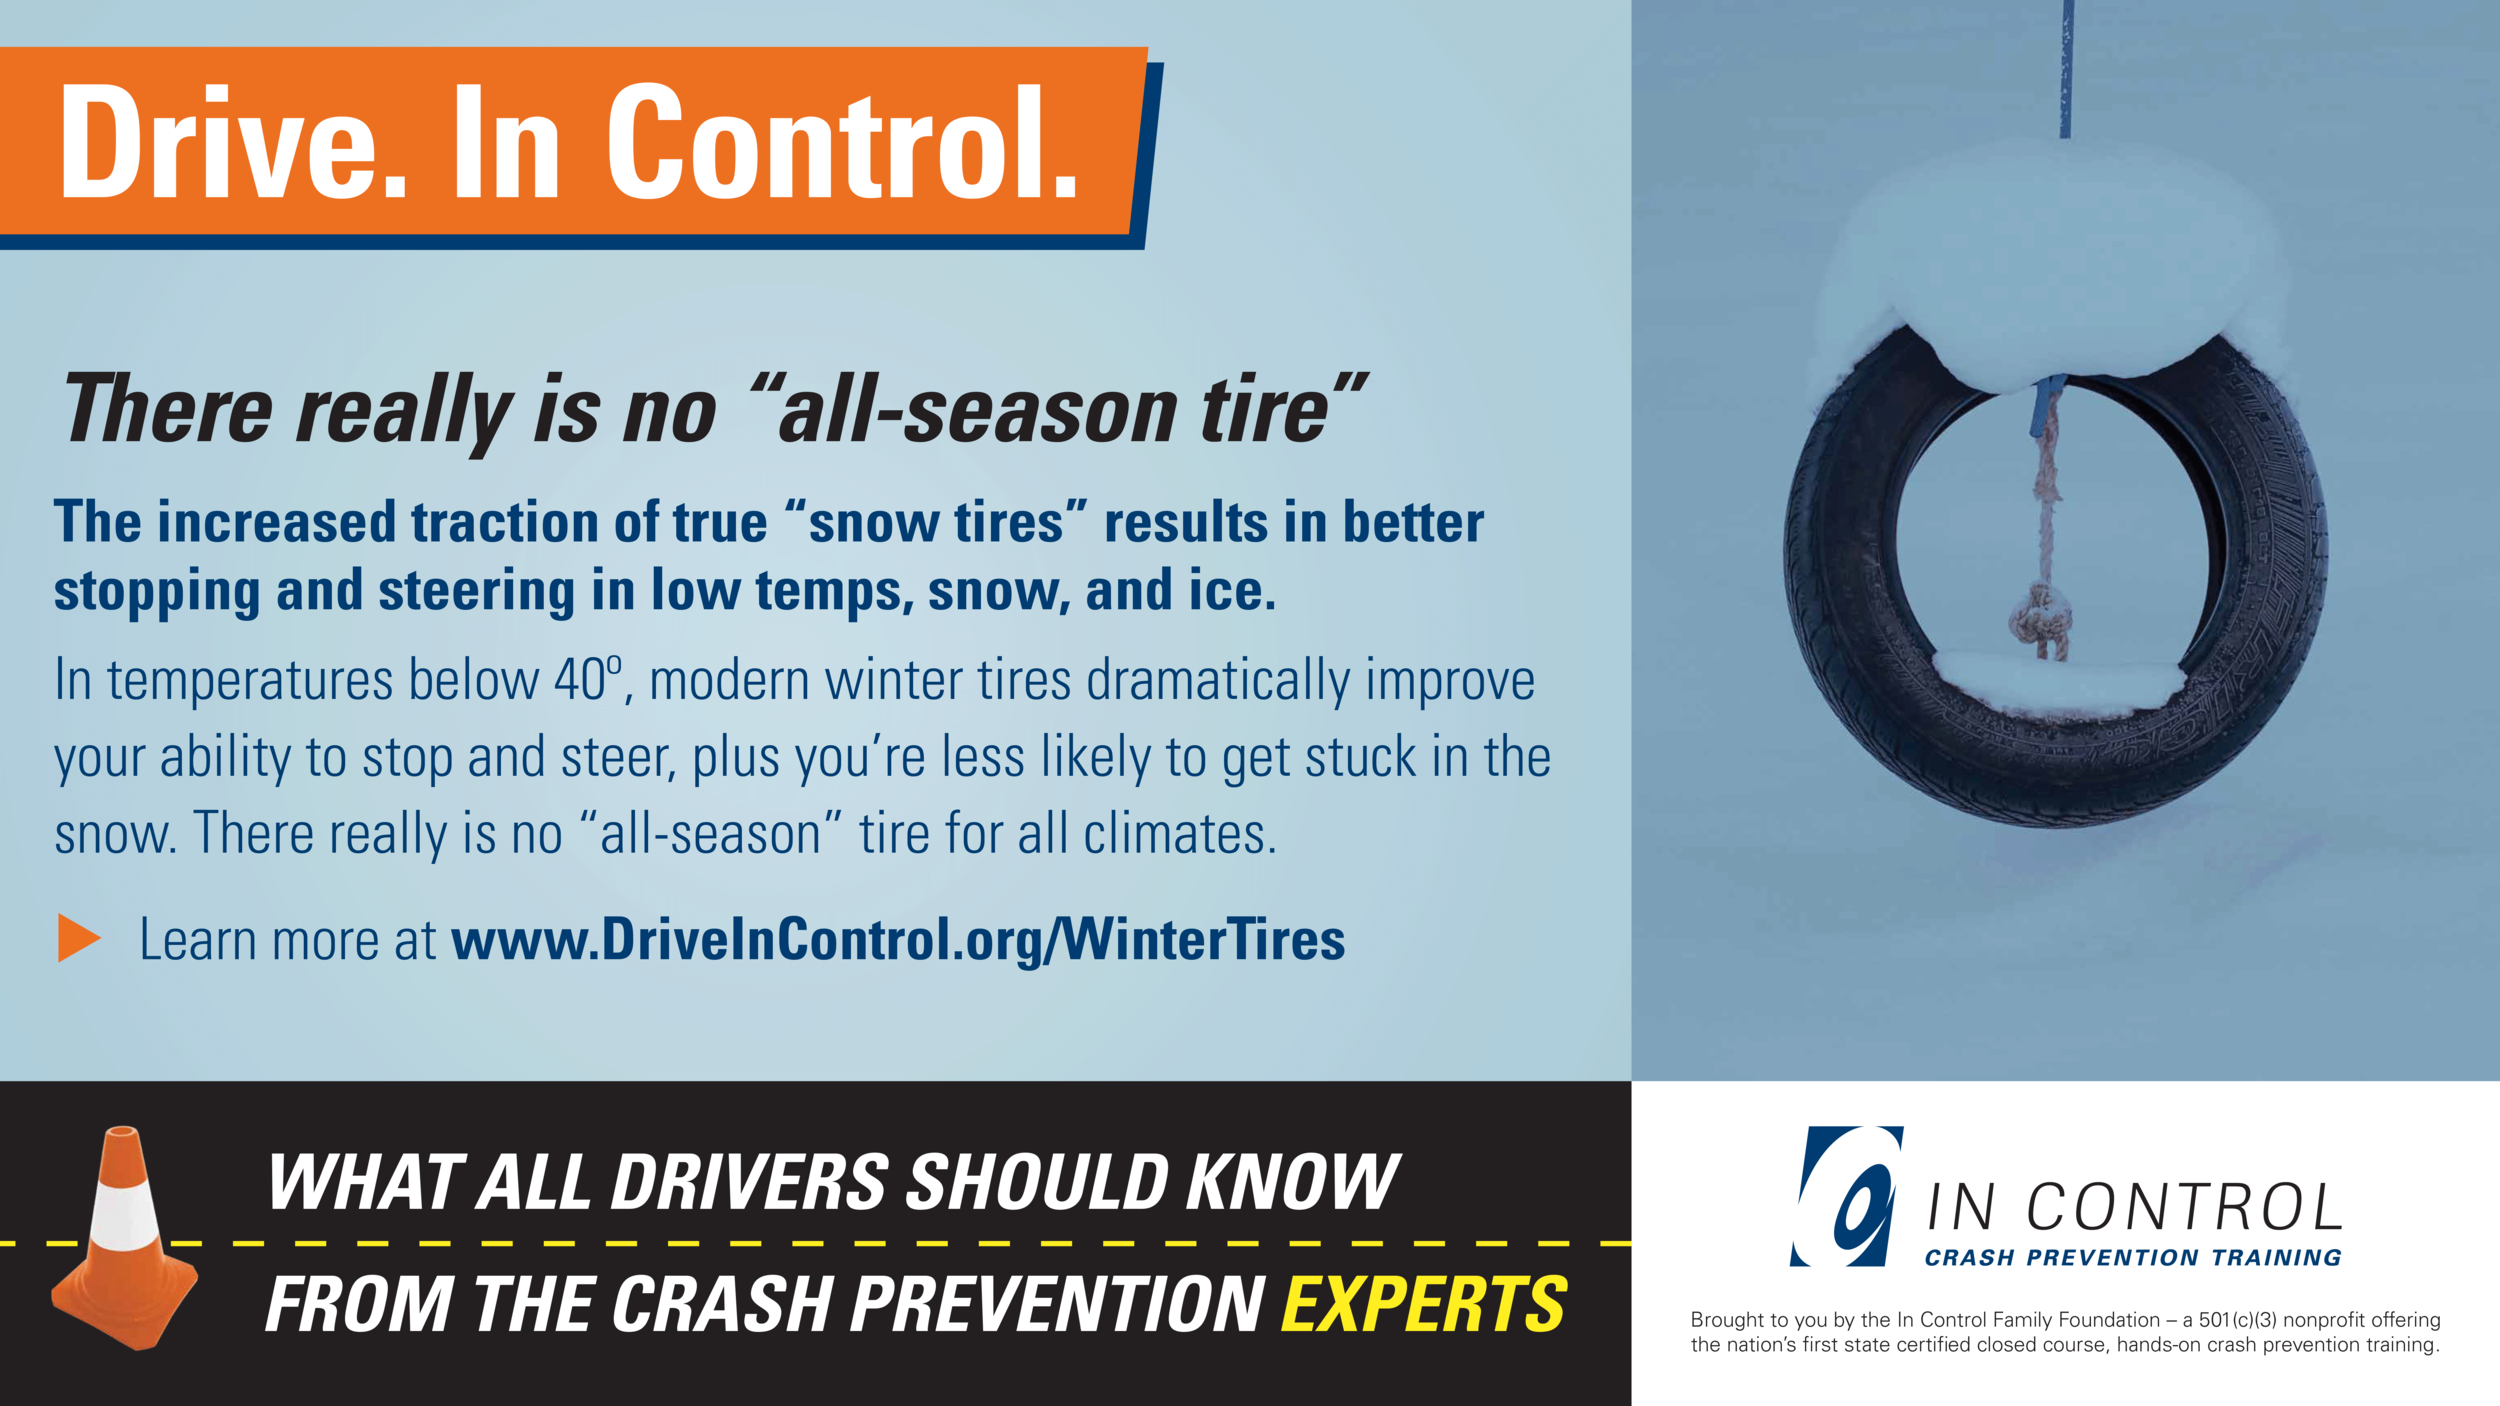 Winter tires save lives